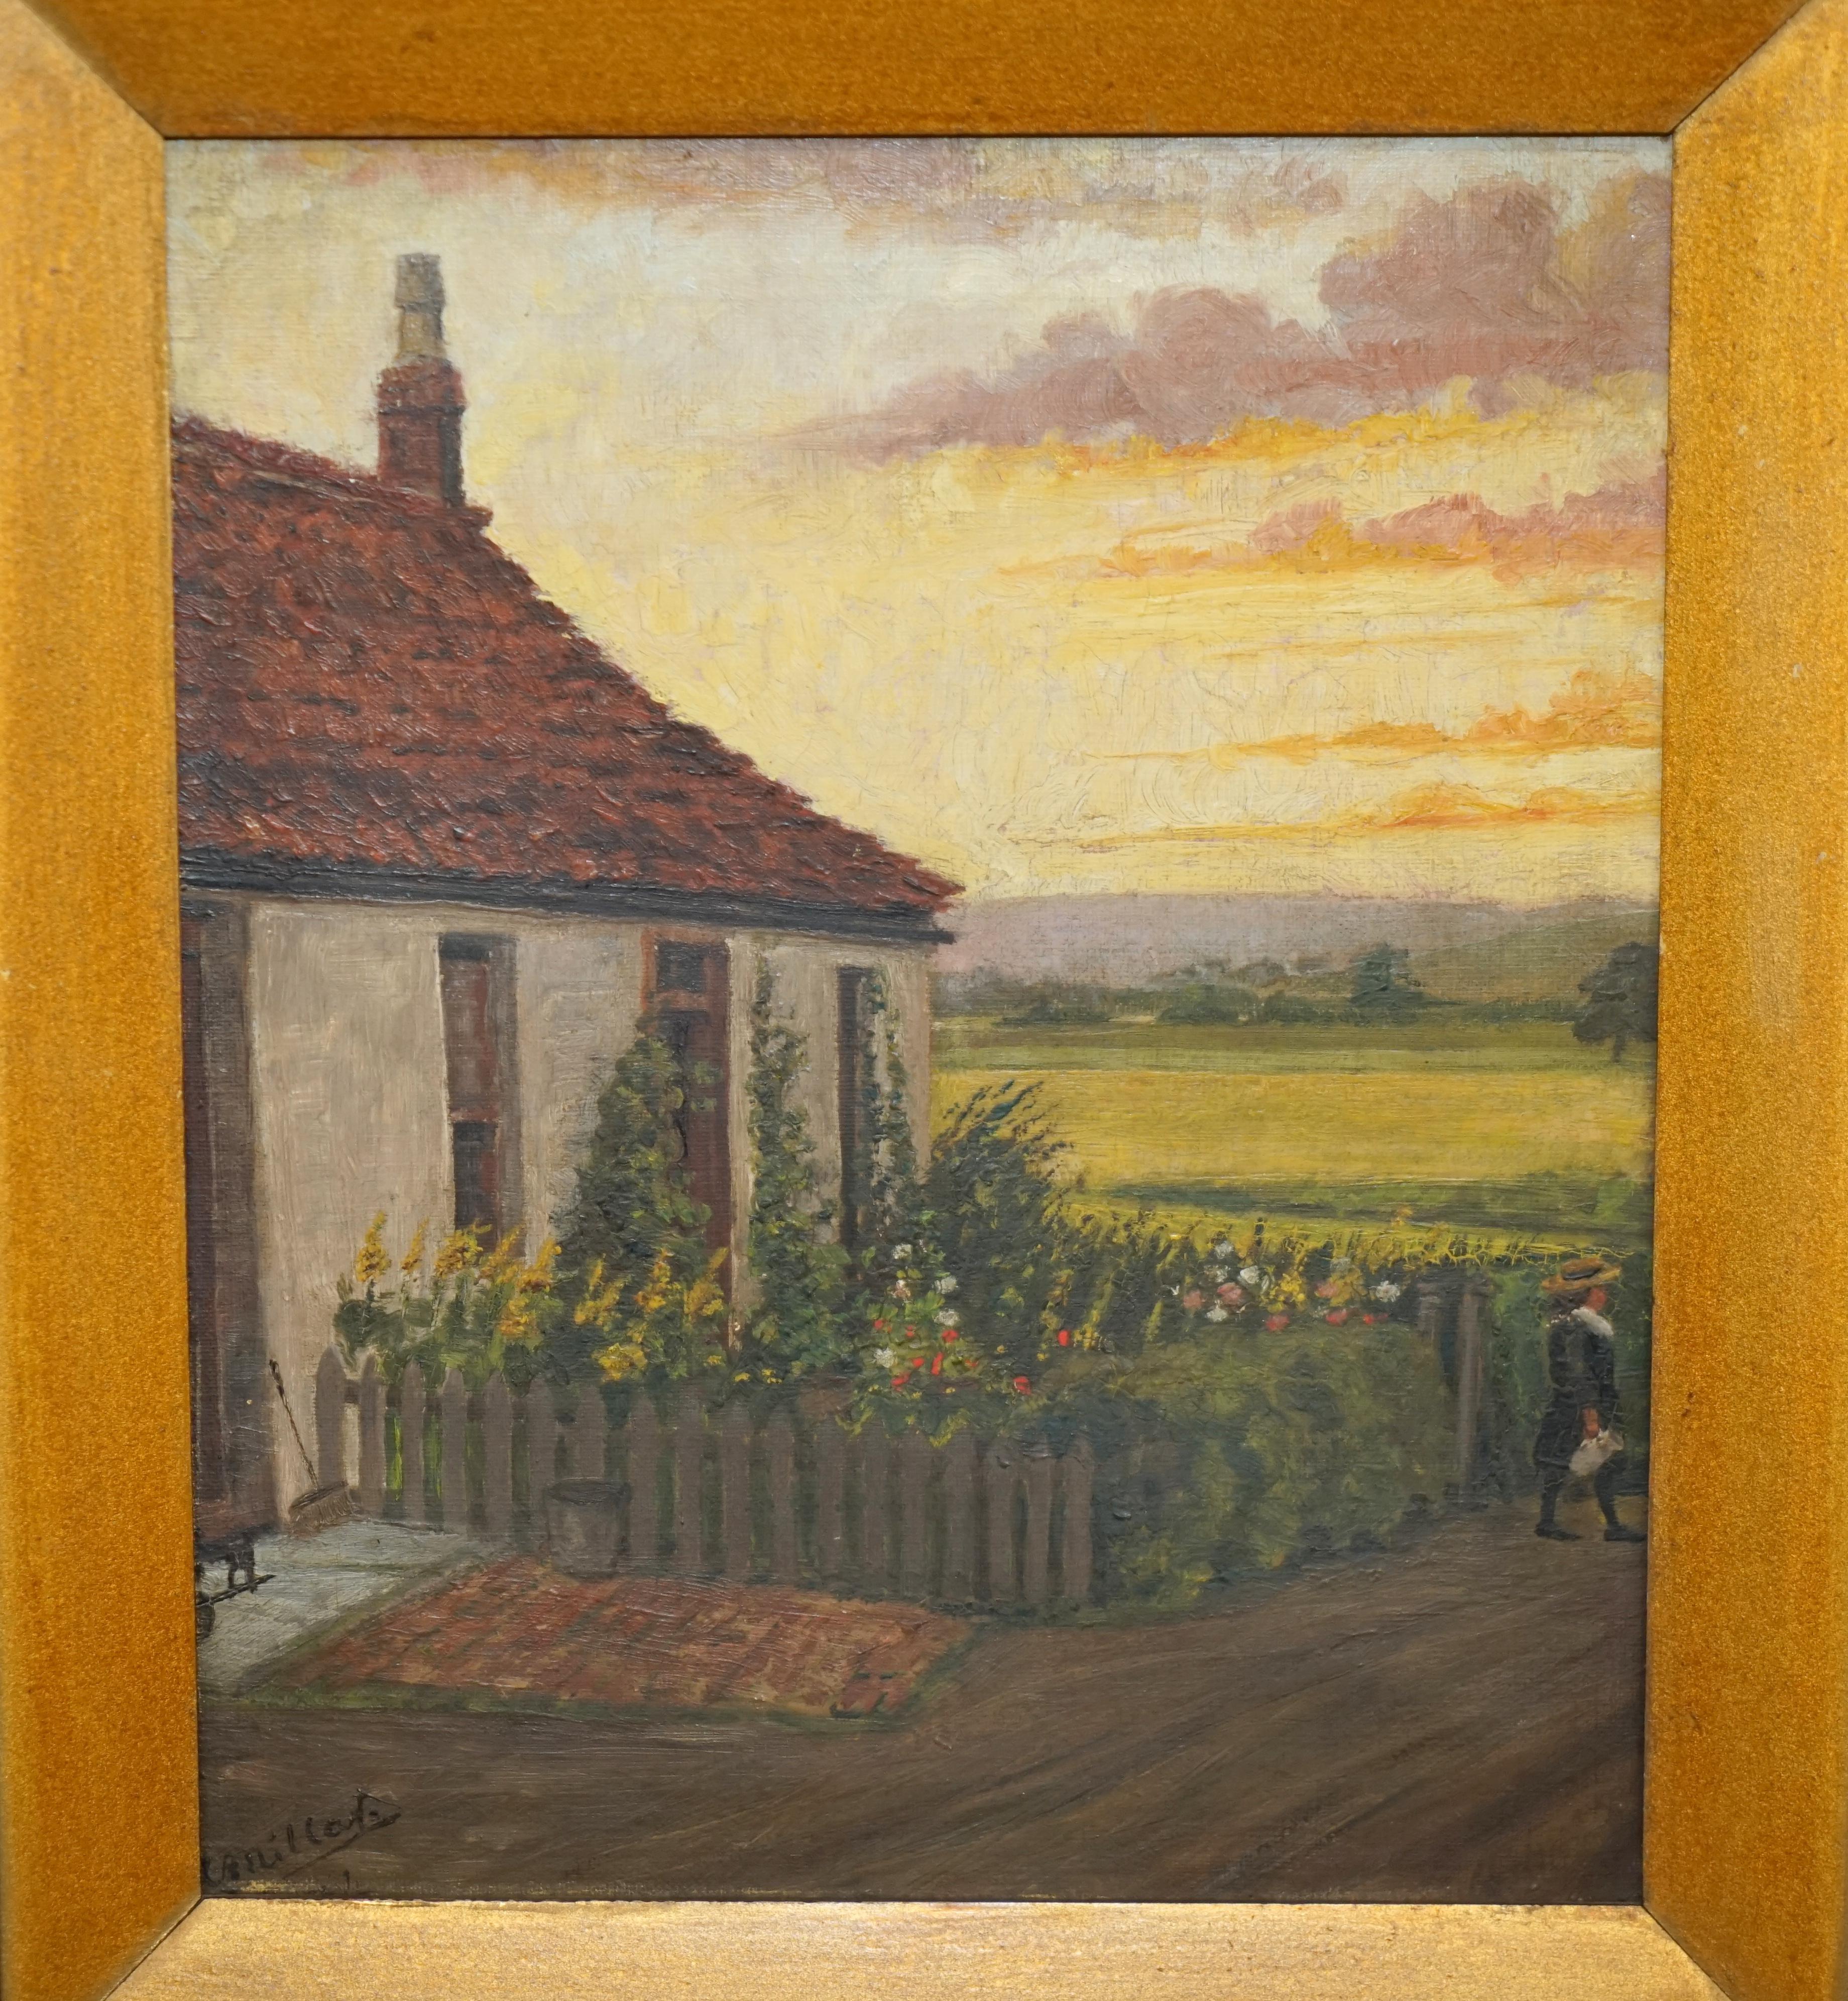 Canvas EXQUISITE 1894 SiGNED & DATED OIL ON CANVAS IN ORIGINAL FRAME OF FARM COTTAGE